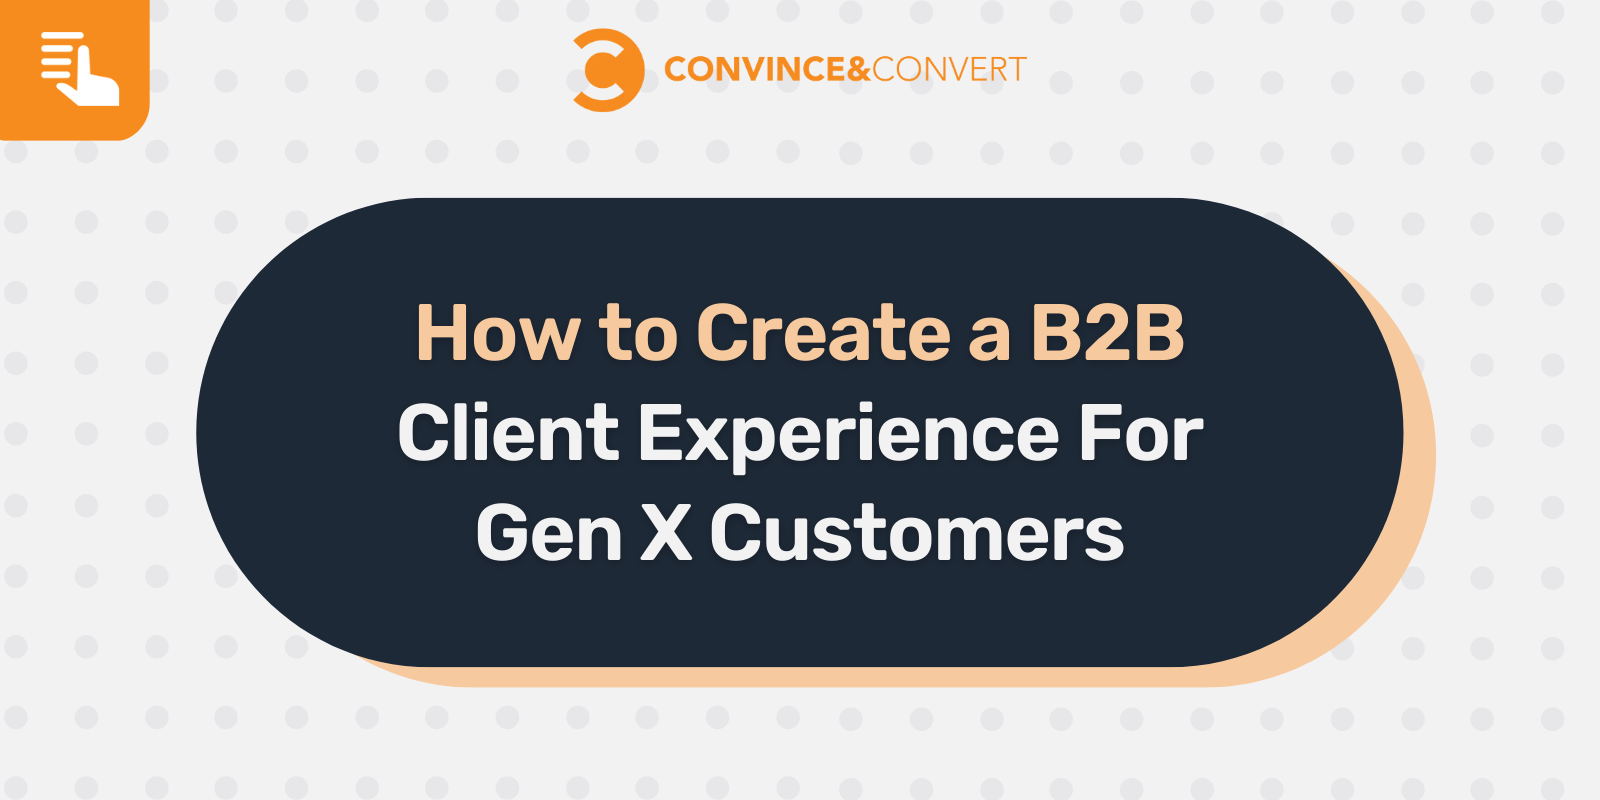 How to Create a B2B Client Experience For Gen X Customers